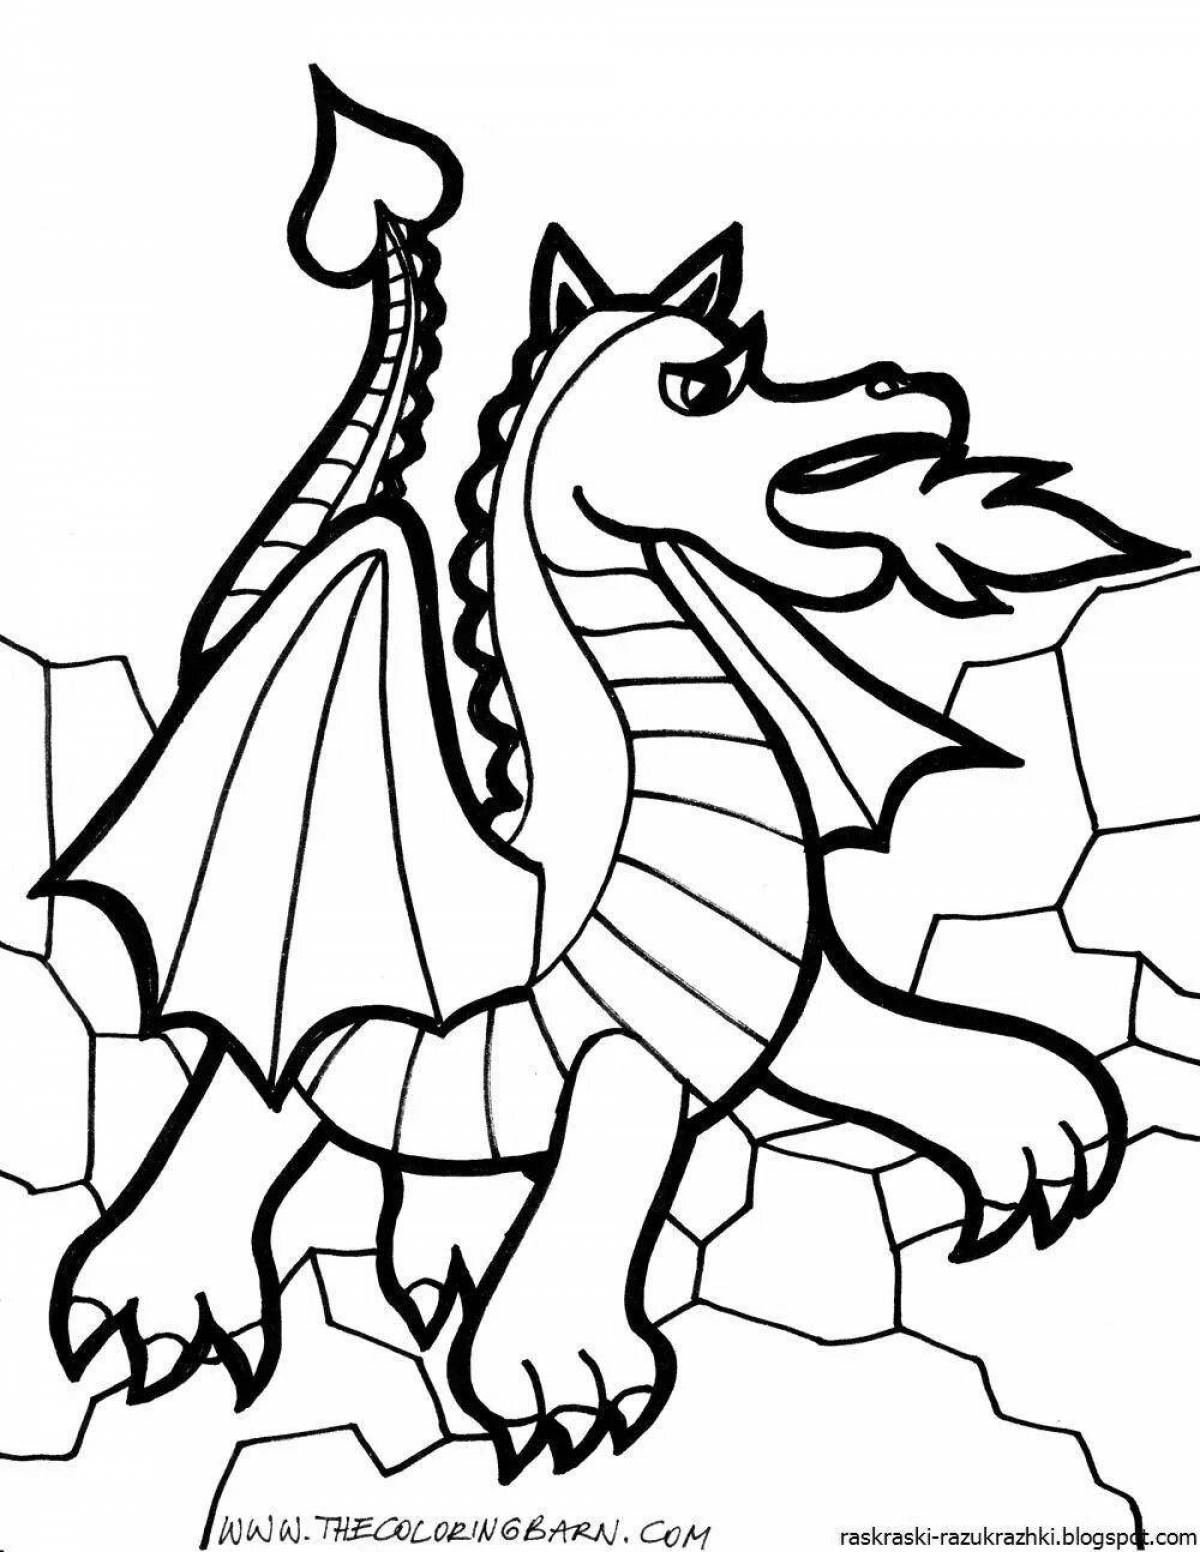 Coloring dragons for children 4-5 years old